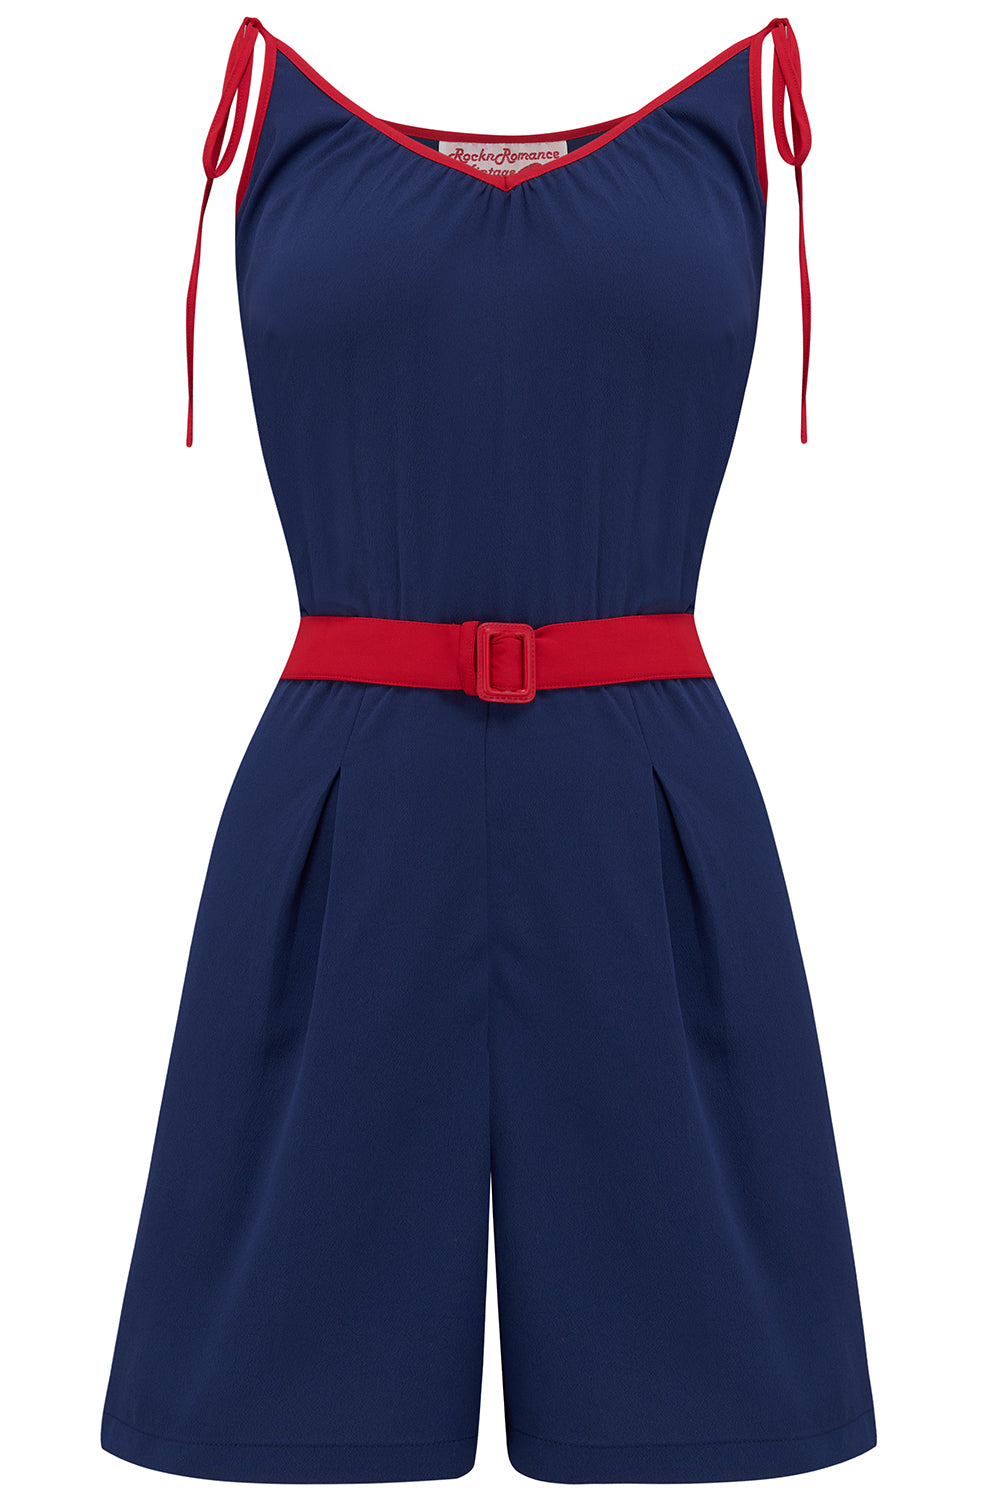 The "Marcie" Beach Playsuit / Romper in Navy With Red Contrasts, True & Authentic 1950s Vintage Style